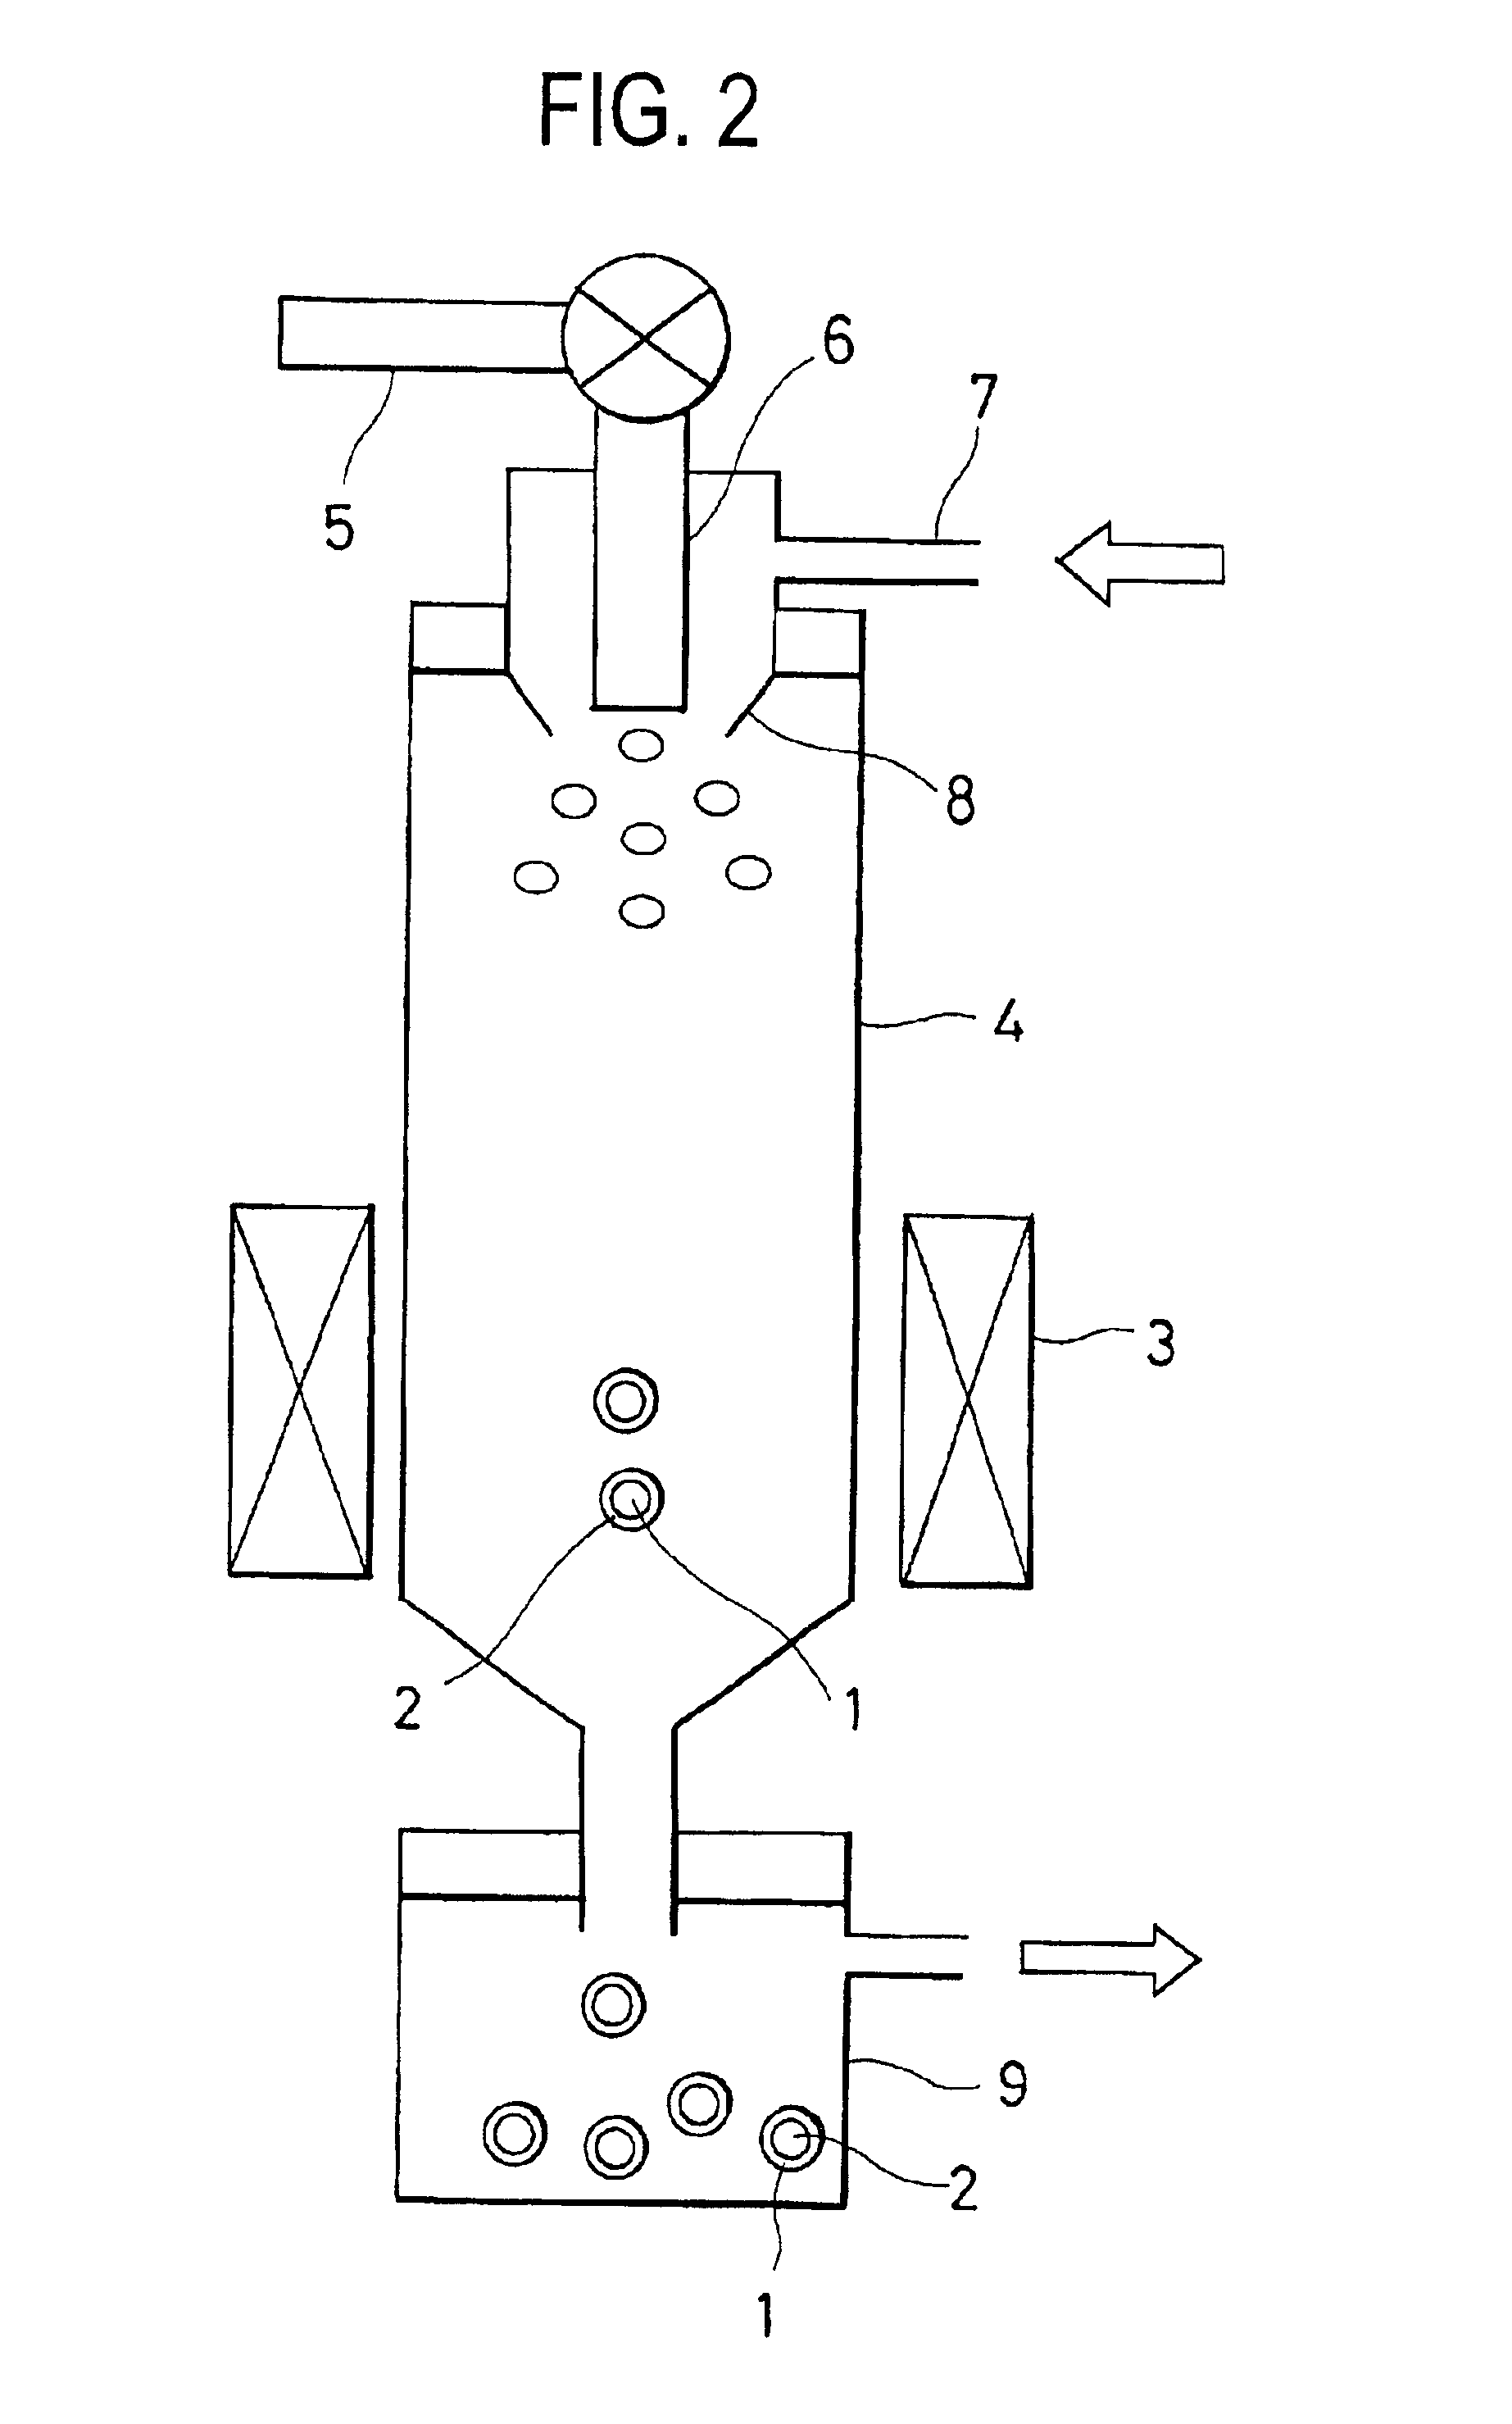 Composite magnetic material and magnetic molding material, magnetic powder compression molding material, and magnetic paint using the composite magnetic material, composite dielectric material and molding material, powder compression molding material, paint, prepreg, and substrate using the composite dielectric material, and electronic part